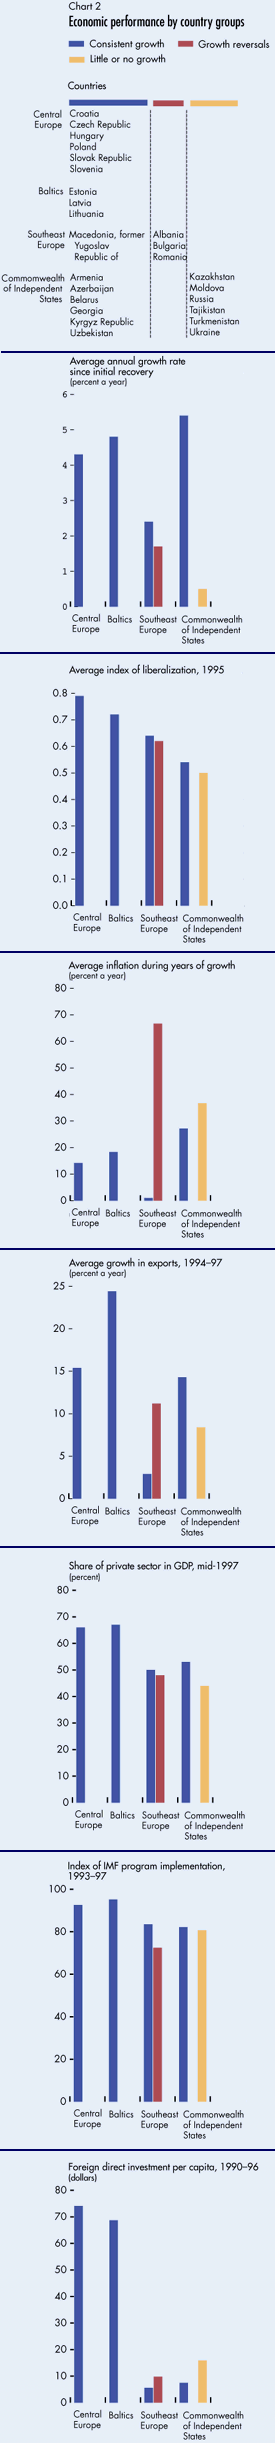 Economic performance by country groups